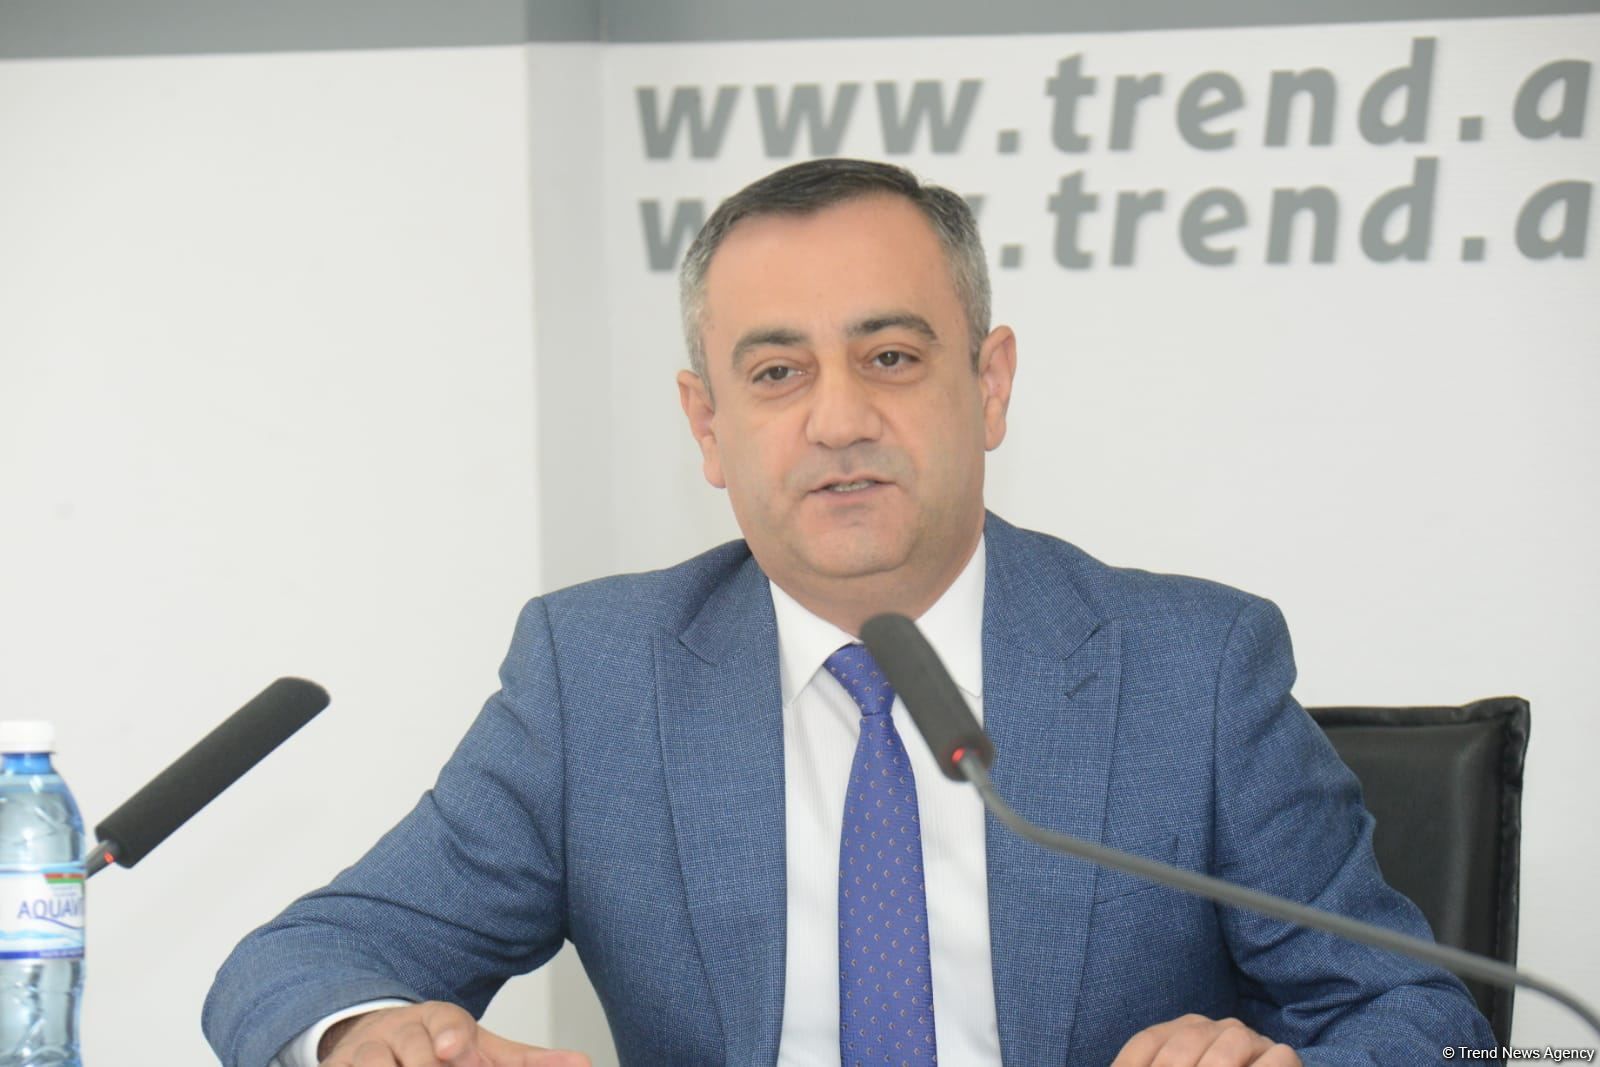 First-year operation results of joint media platform of Turkic-speaking countries discussed at Trend news agency [PHOTO/VIDEO] - Gallery Image